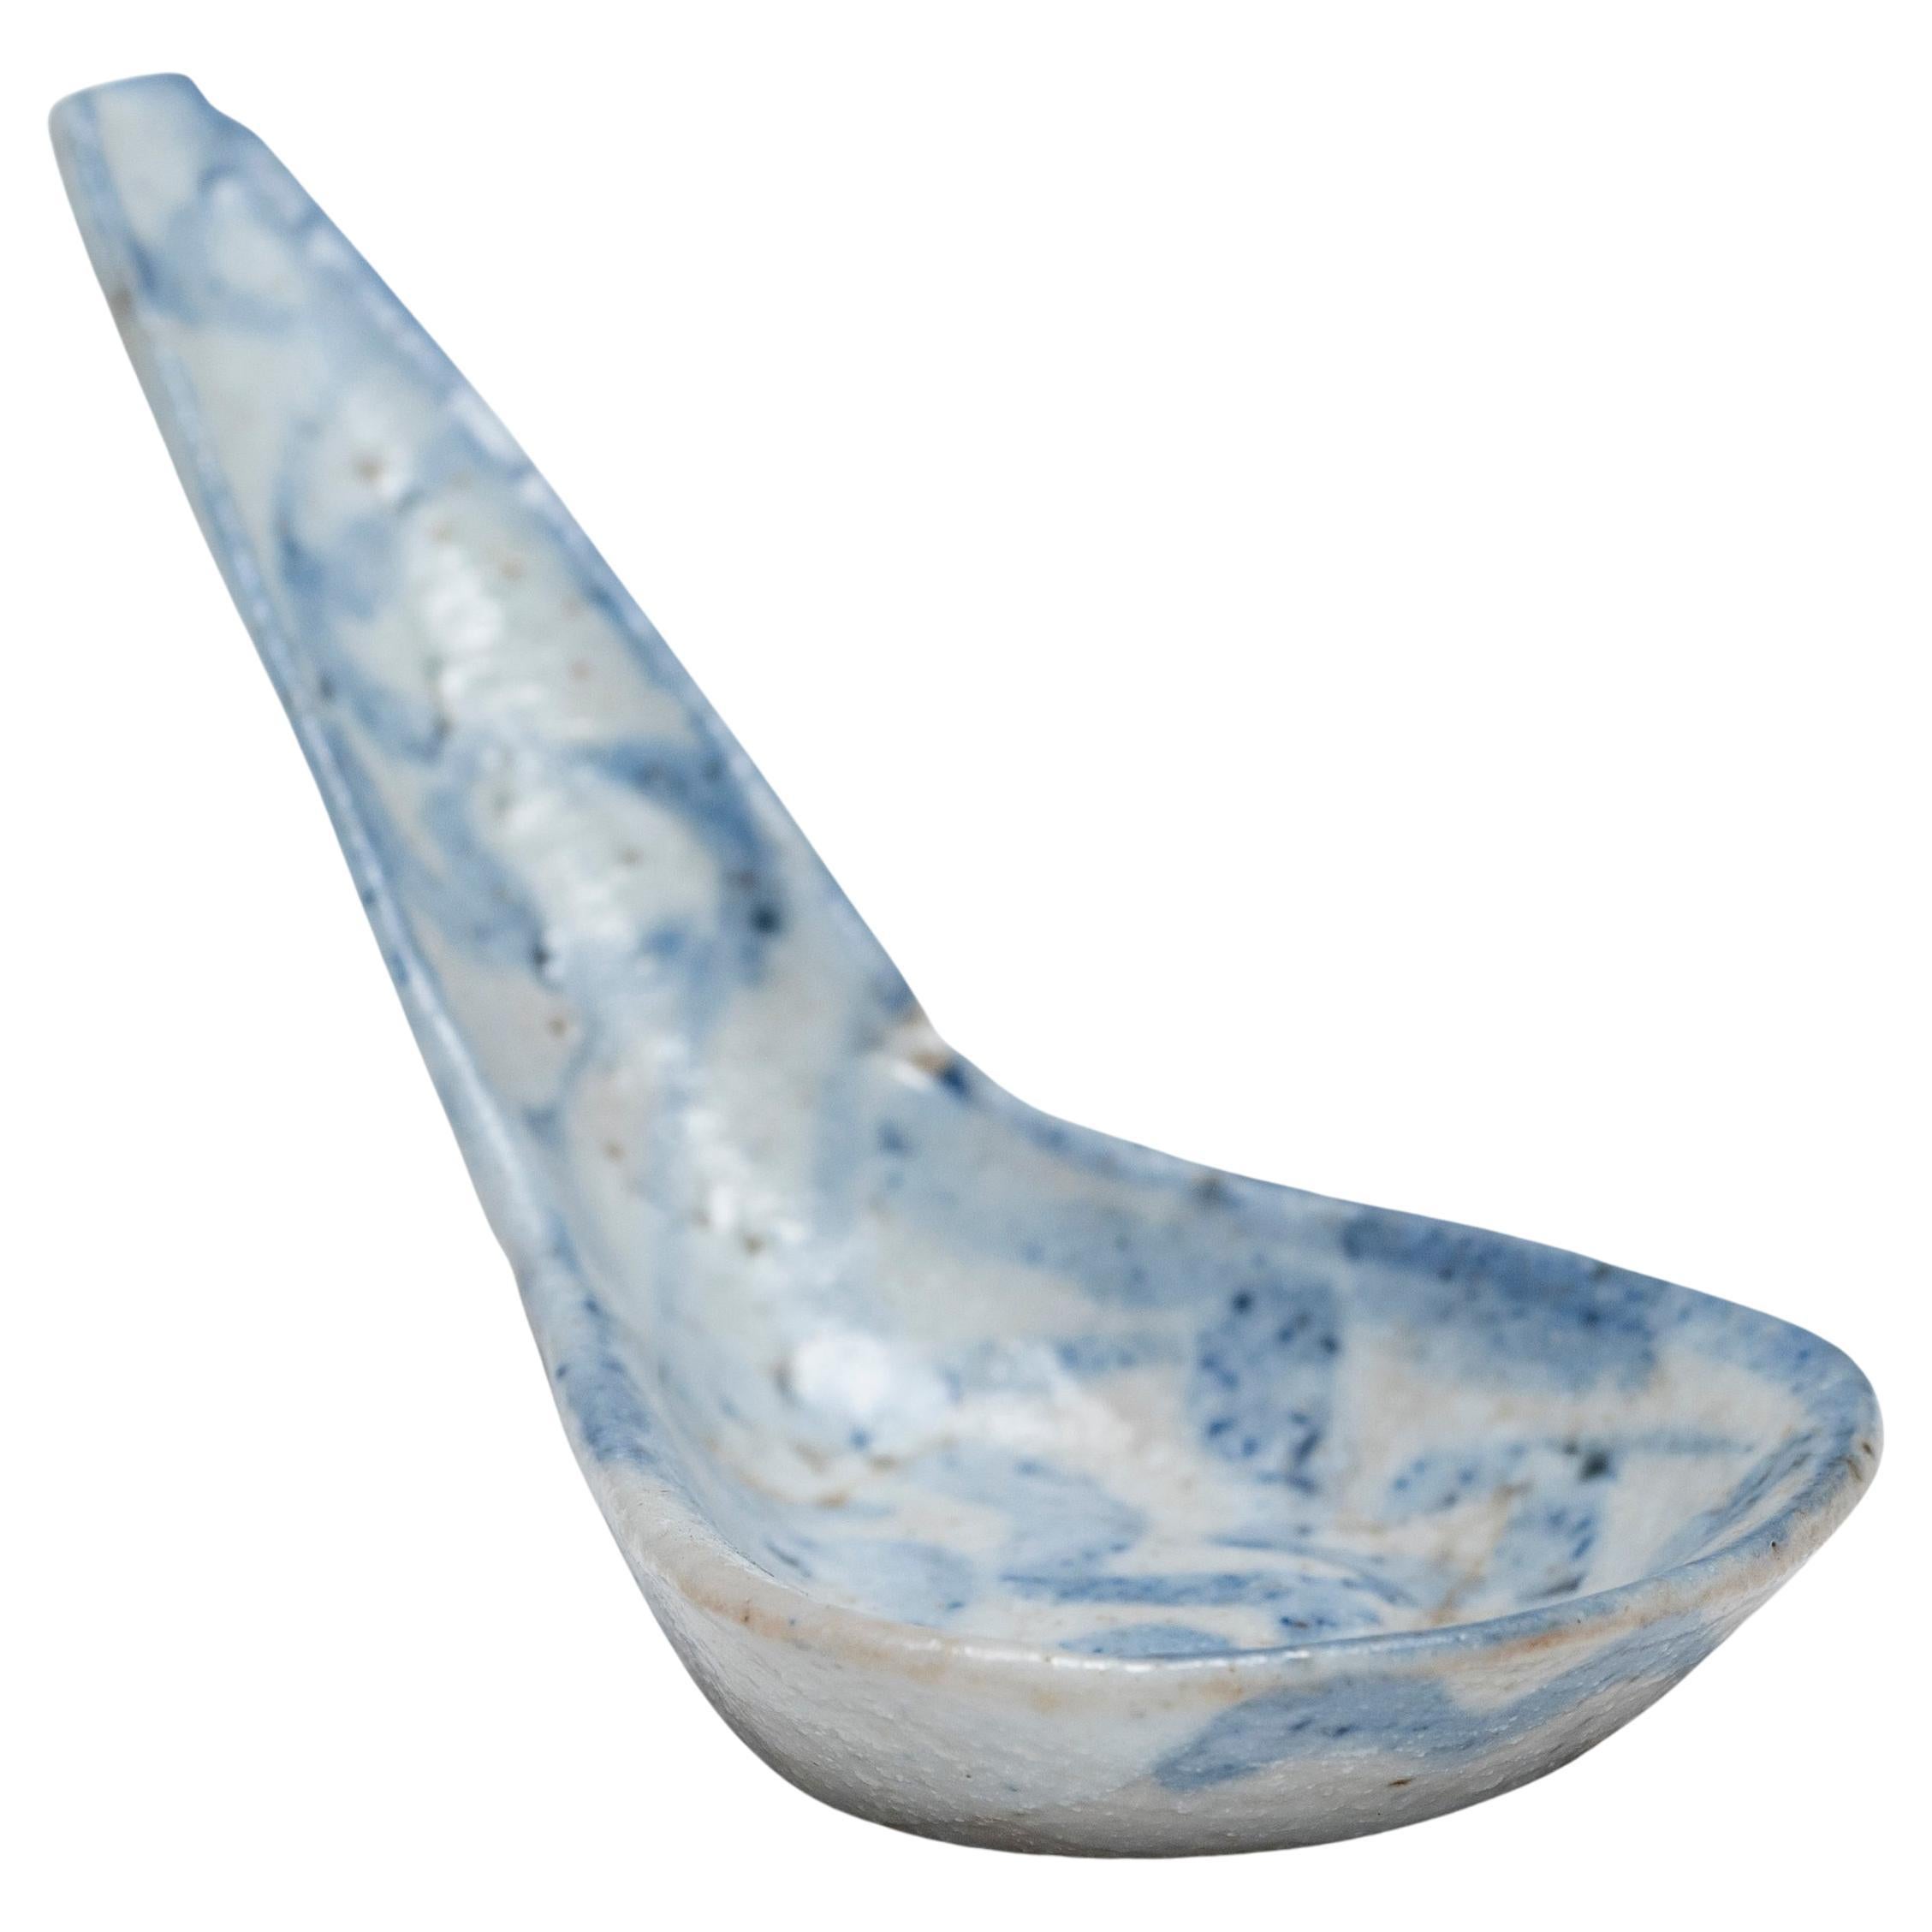 Chinese Blue and White Spoon, c. 1850